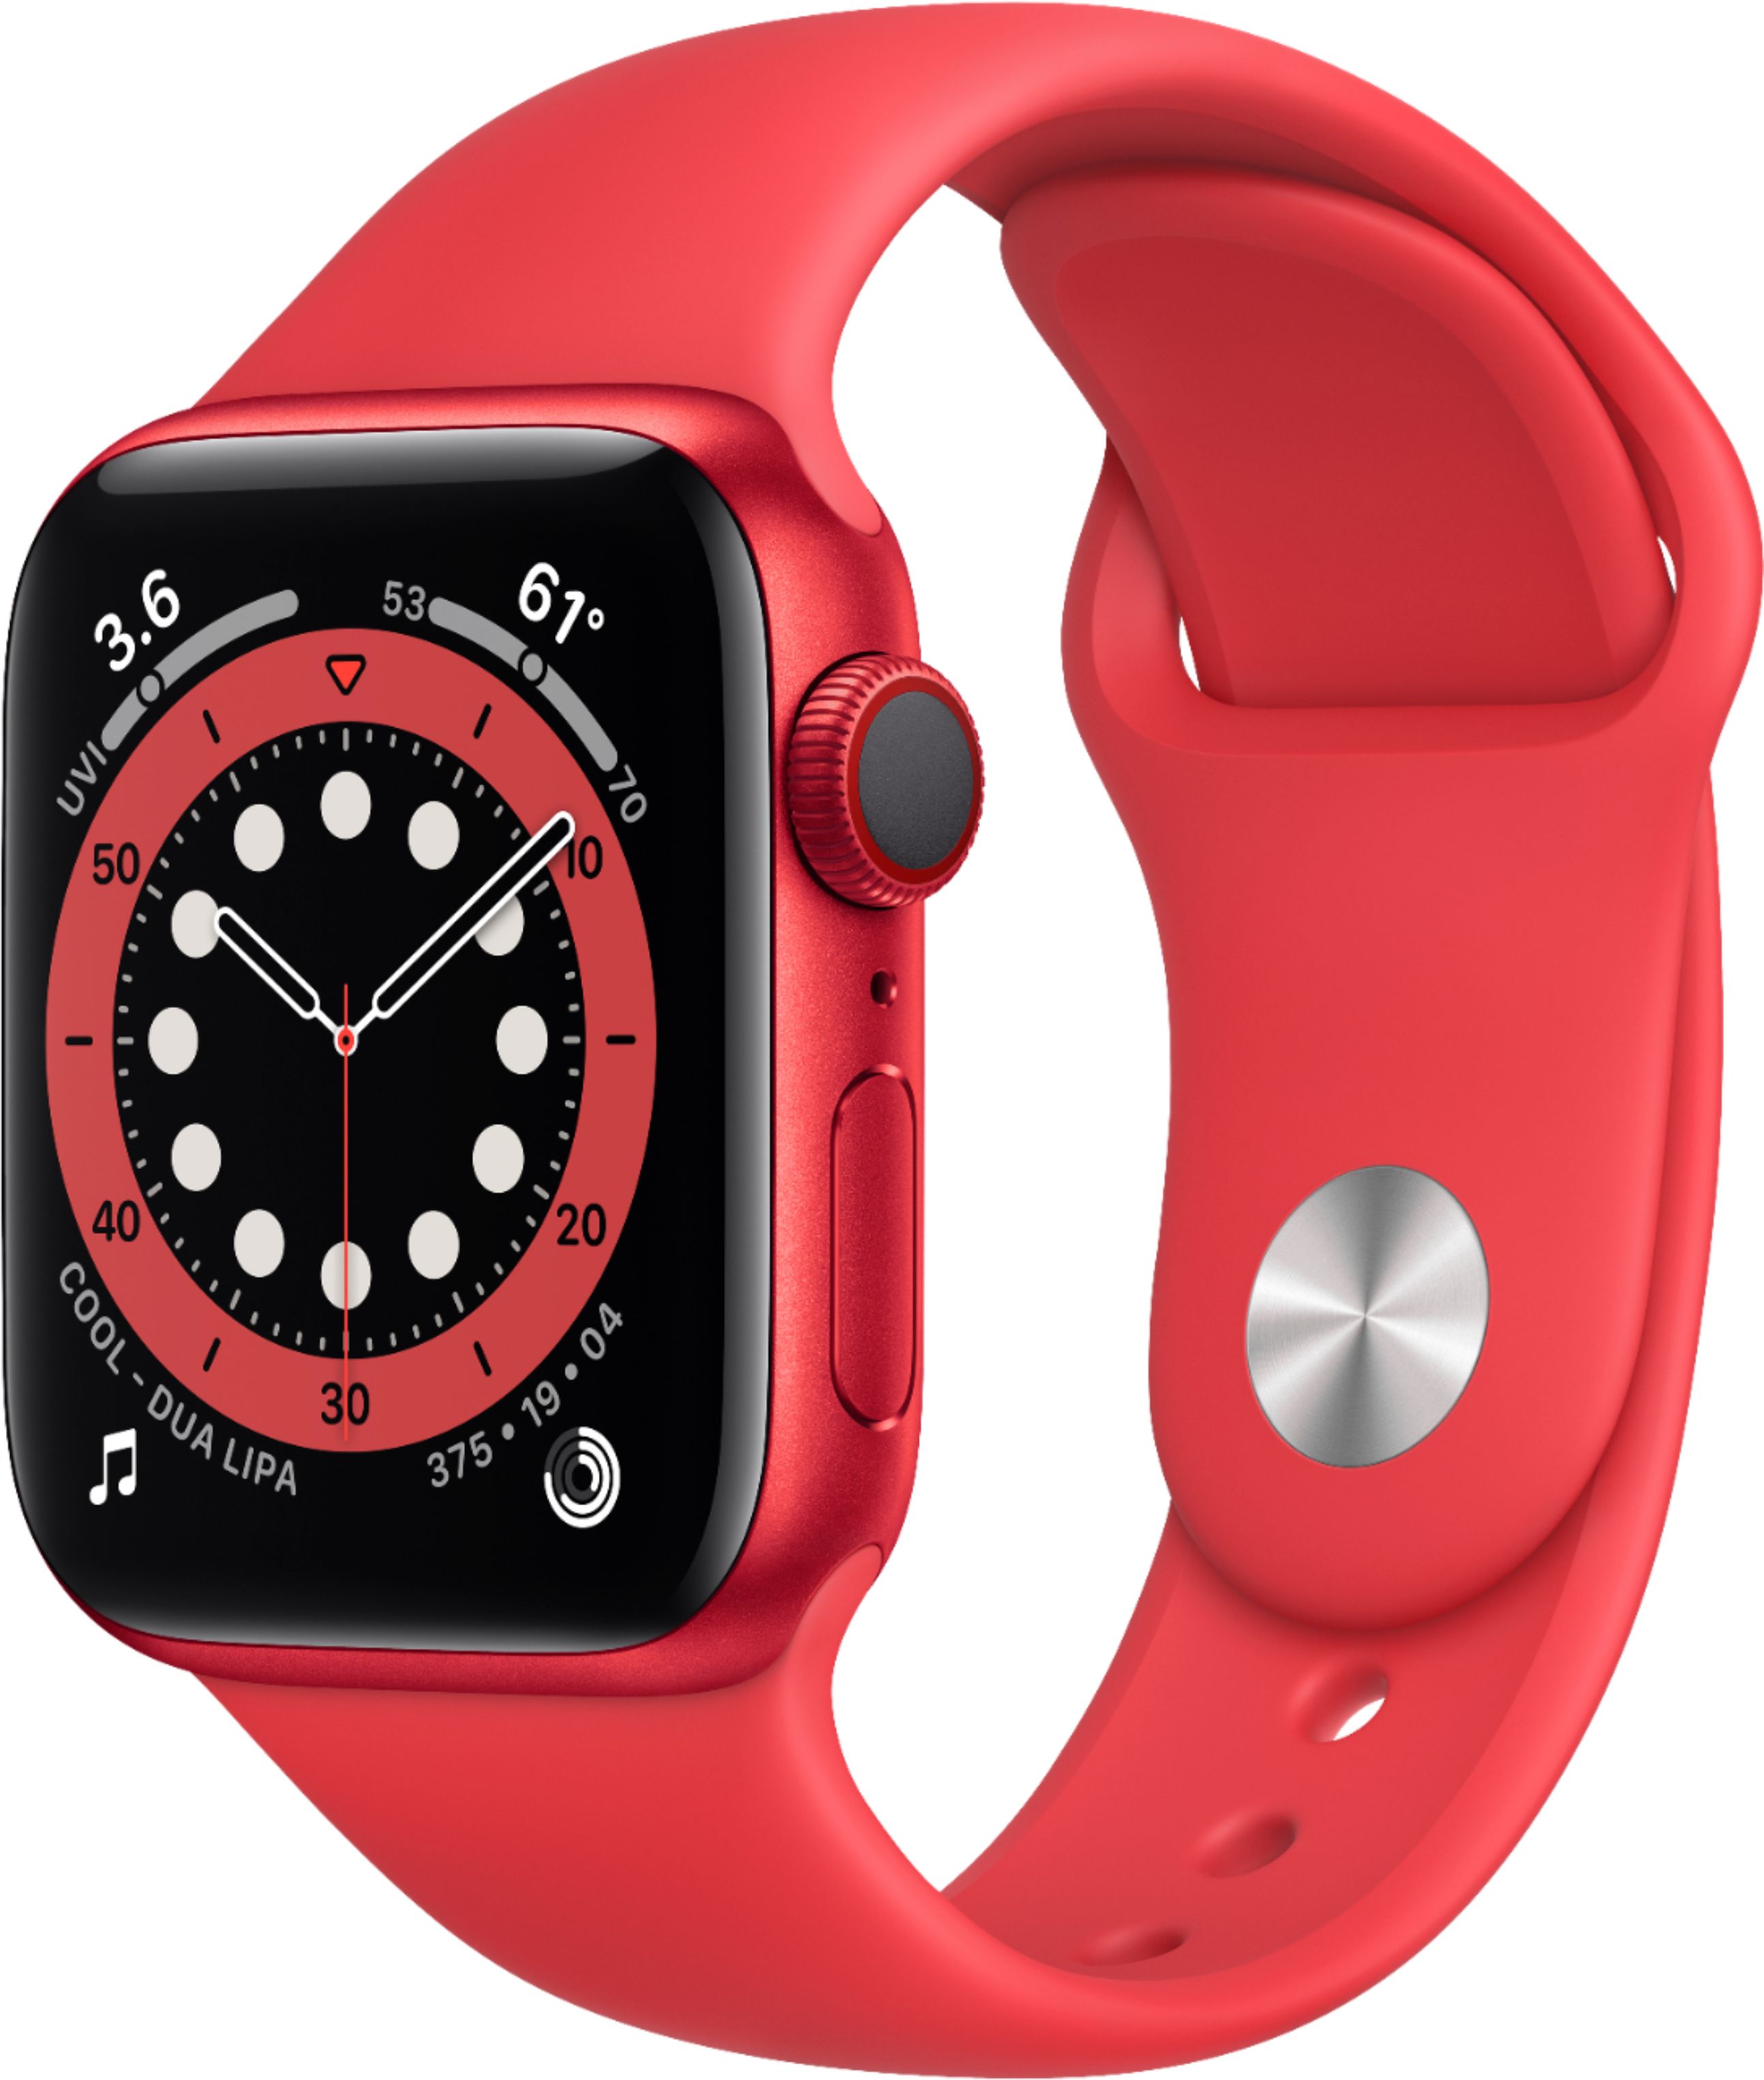 Apple Watch Series 6 (GPS + Cellular) 44mm (PRODUCT)RED Aluminum Case with (PRODUCT)RED Sport Band - (PRODUCT)RED